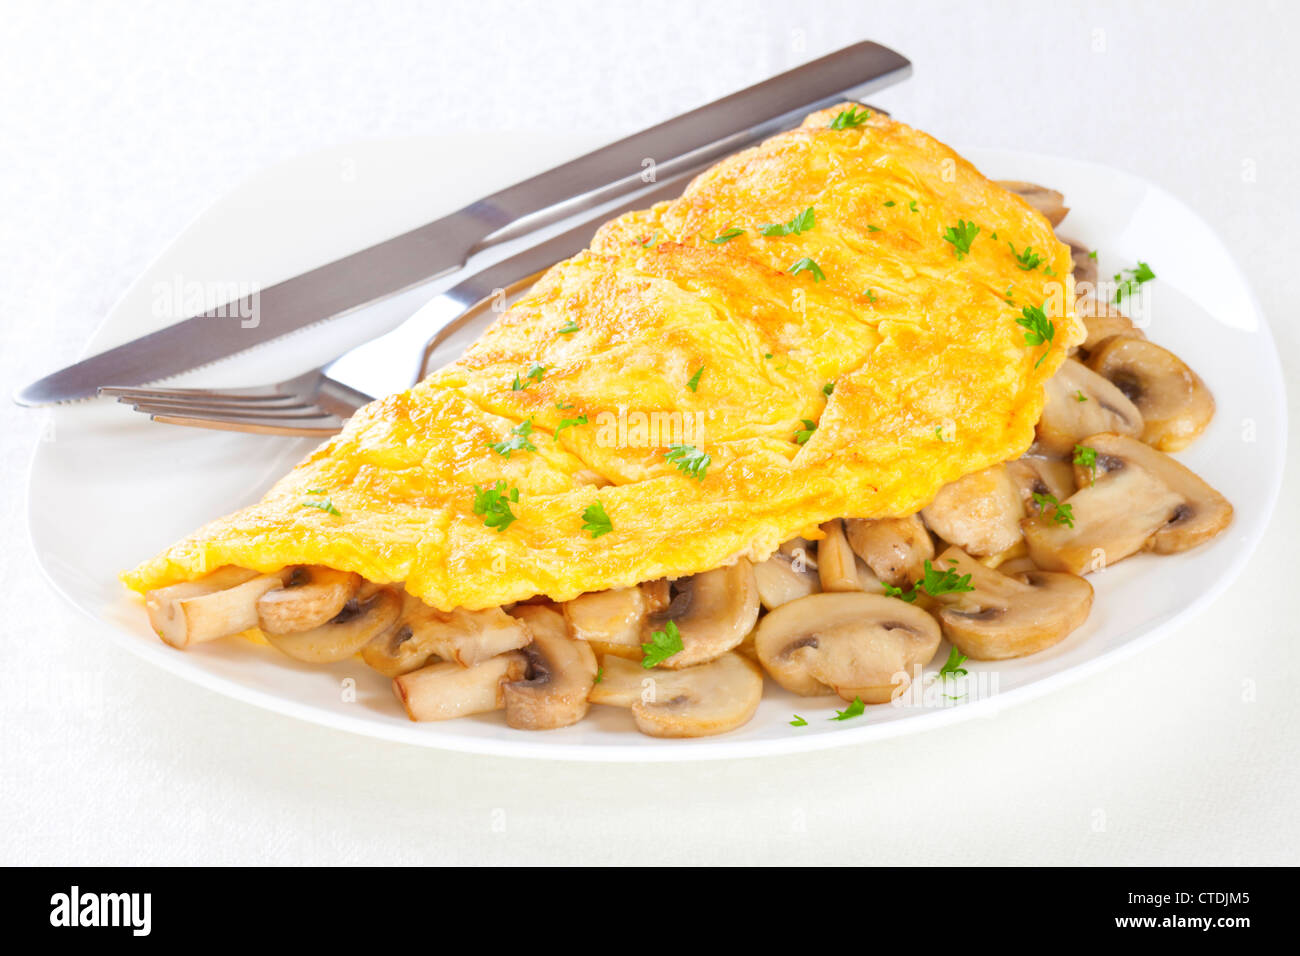 French omelet with mushrooms, on a plate and ready to eat. Stock Photo